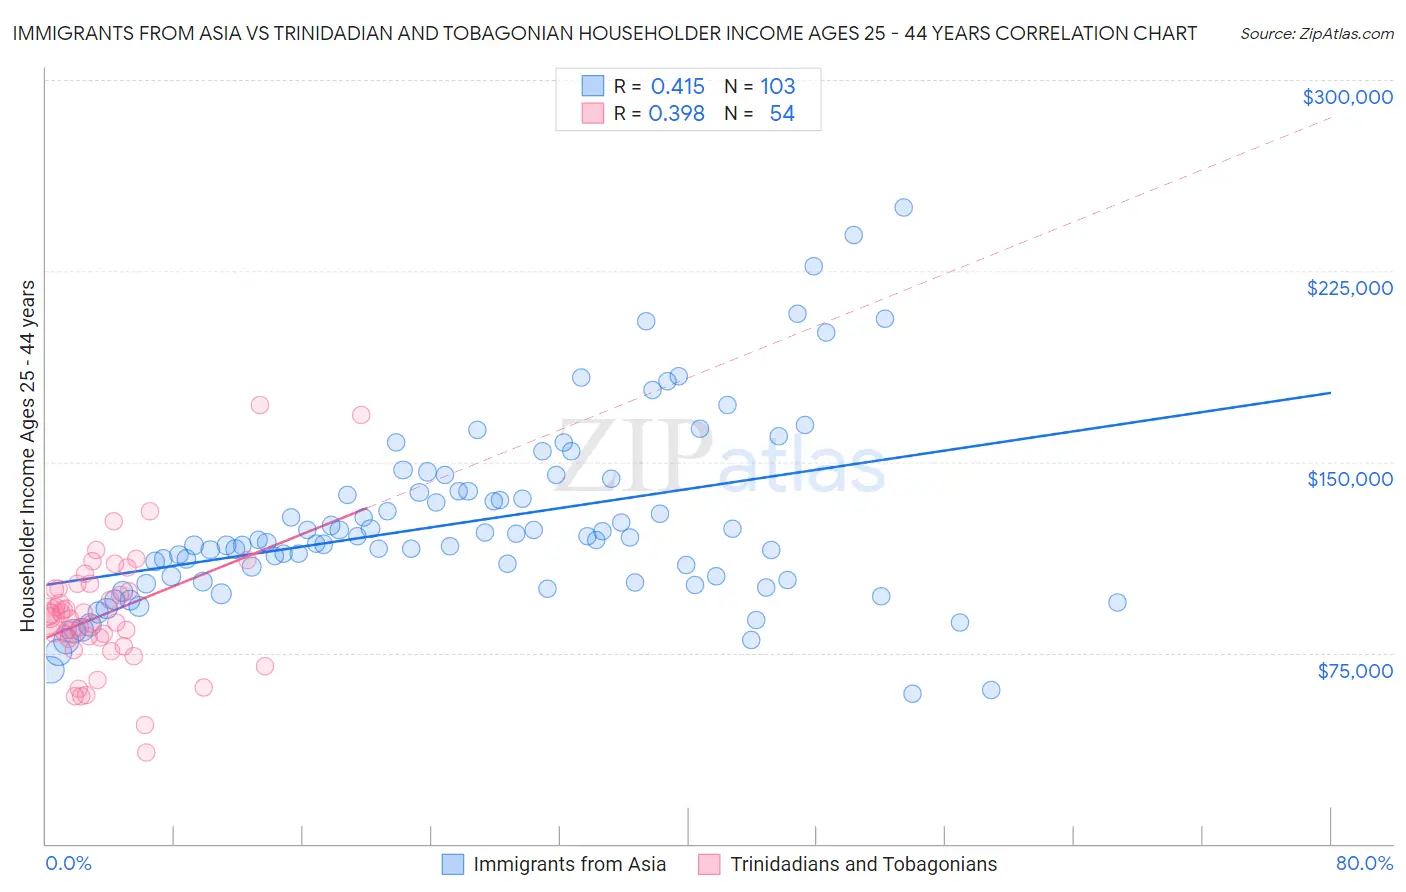 Immigrants from Asia vs Trinidadian and Tobagonian Householder Income Ages 25 - 44 years